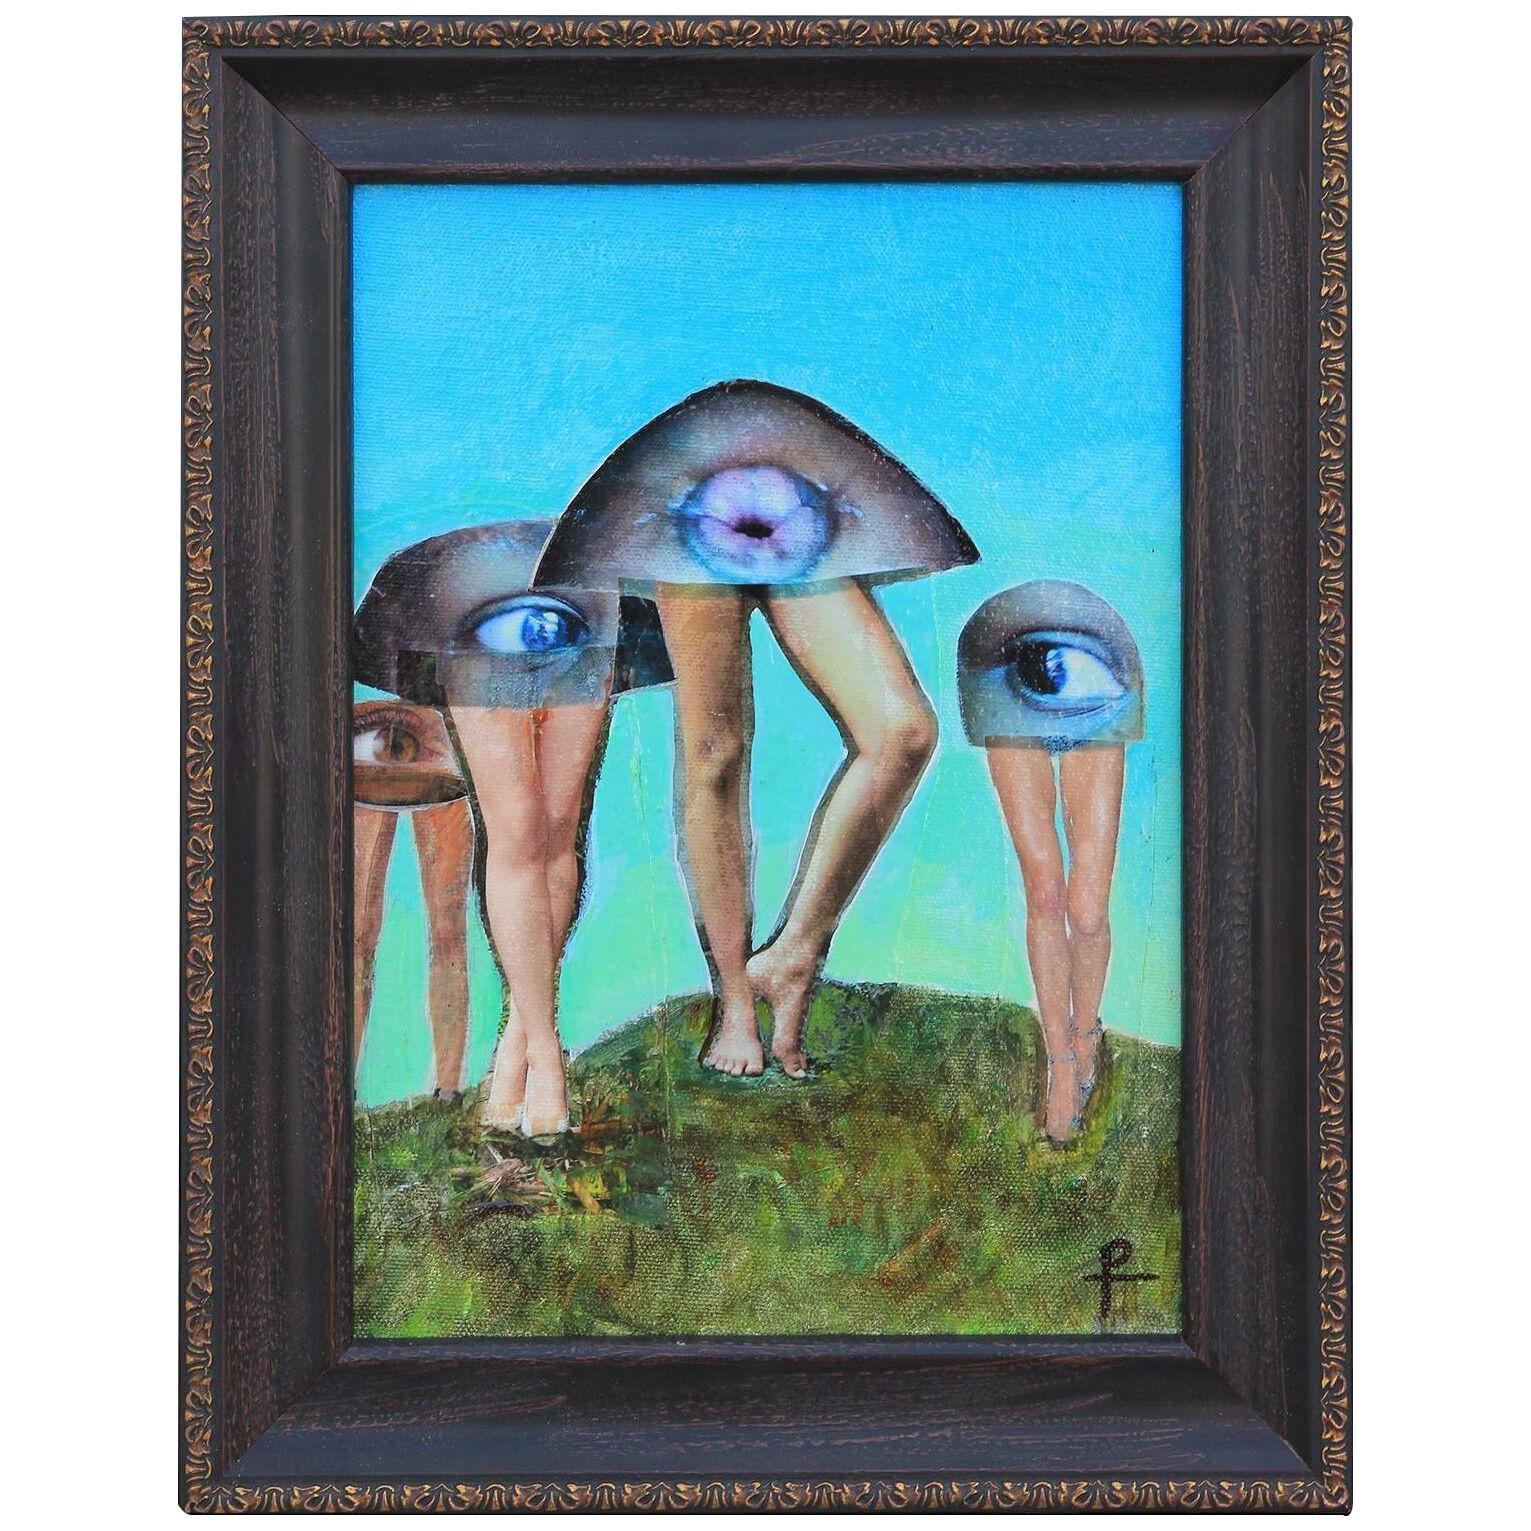 "Mushrooms" Contemporary Surrealist Collage Early 21st Century